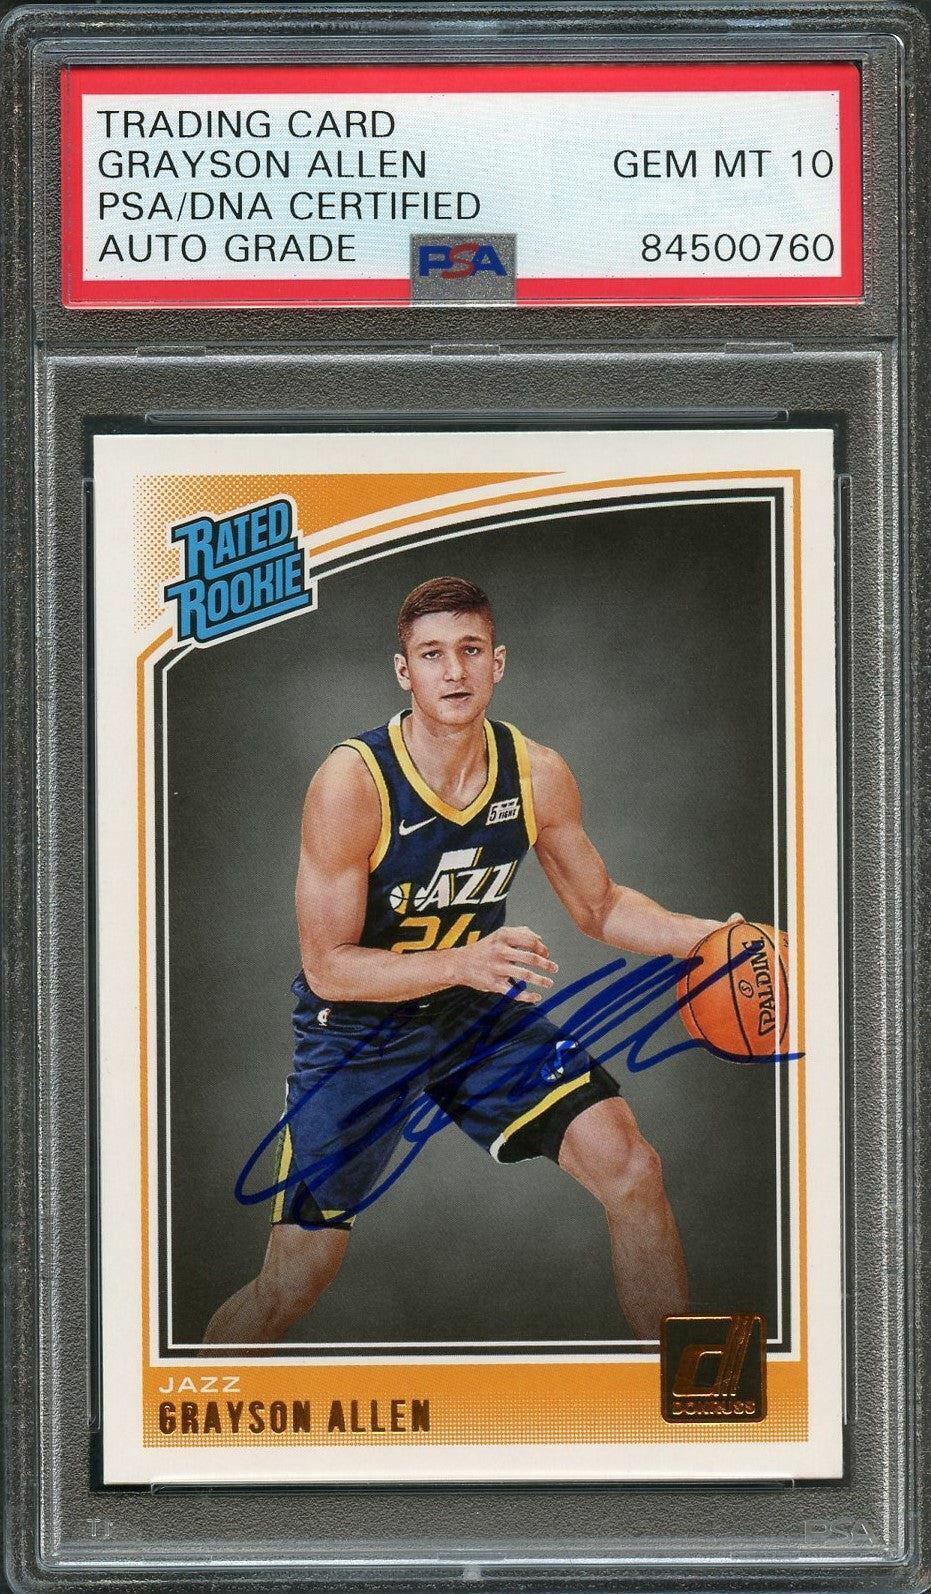 2018-19 Donruss Rated Rookie #156 Grayson Allen Signed Card AUTO 10 PSA/DNA Slab Image 1